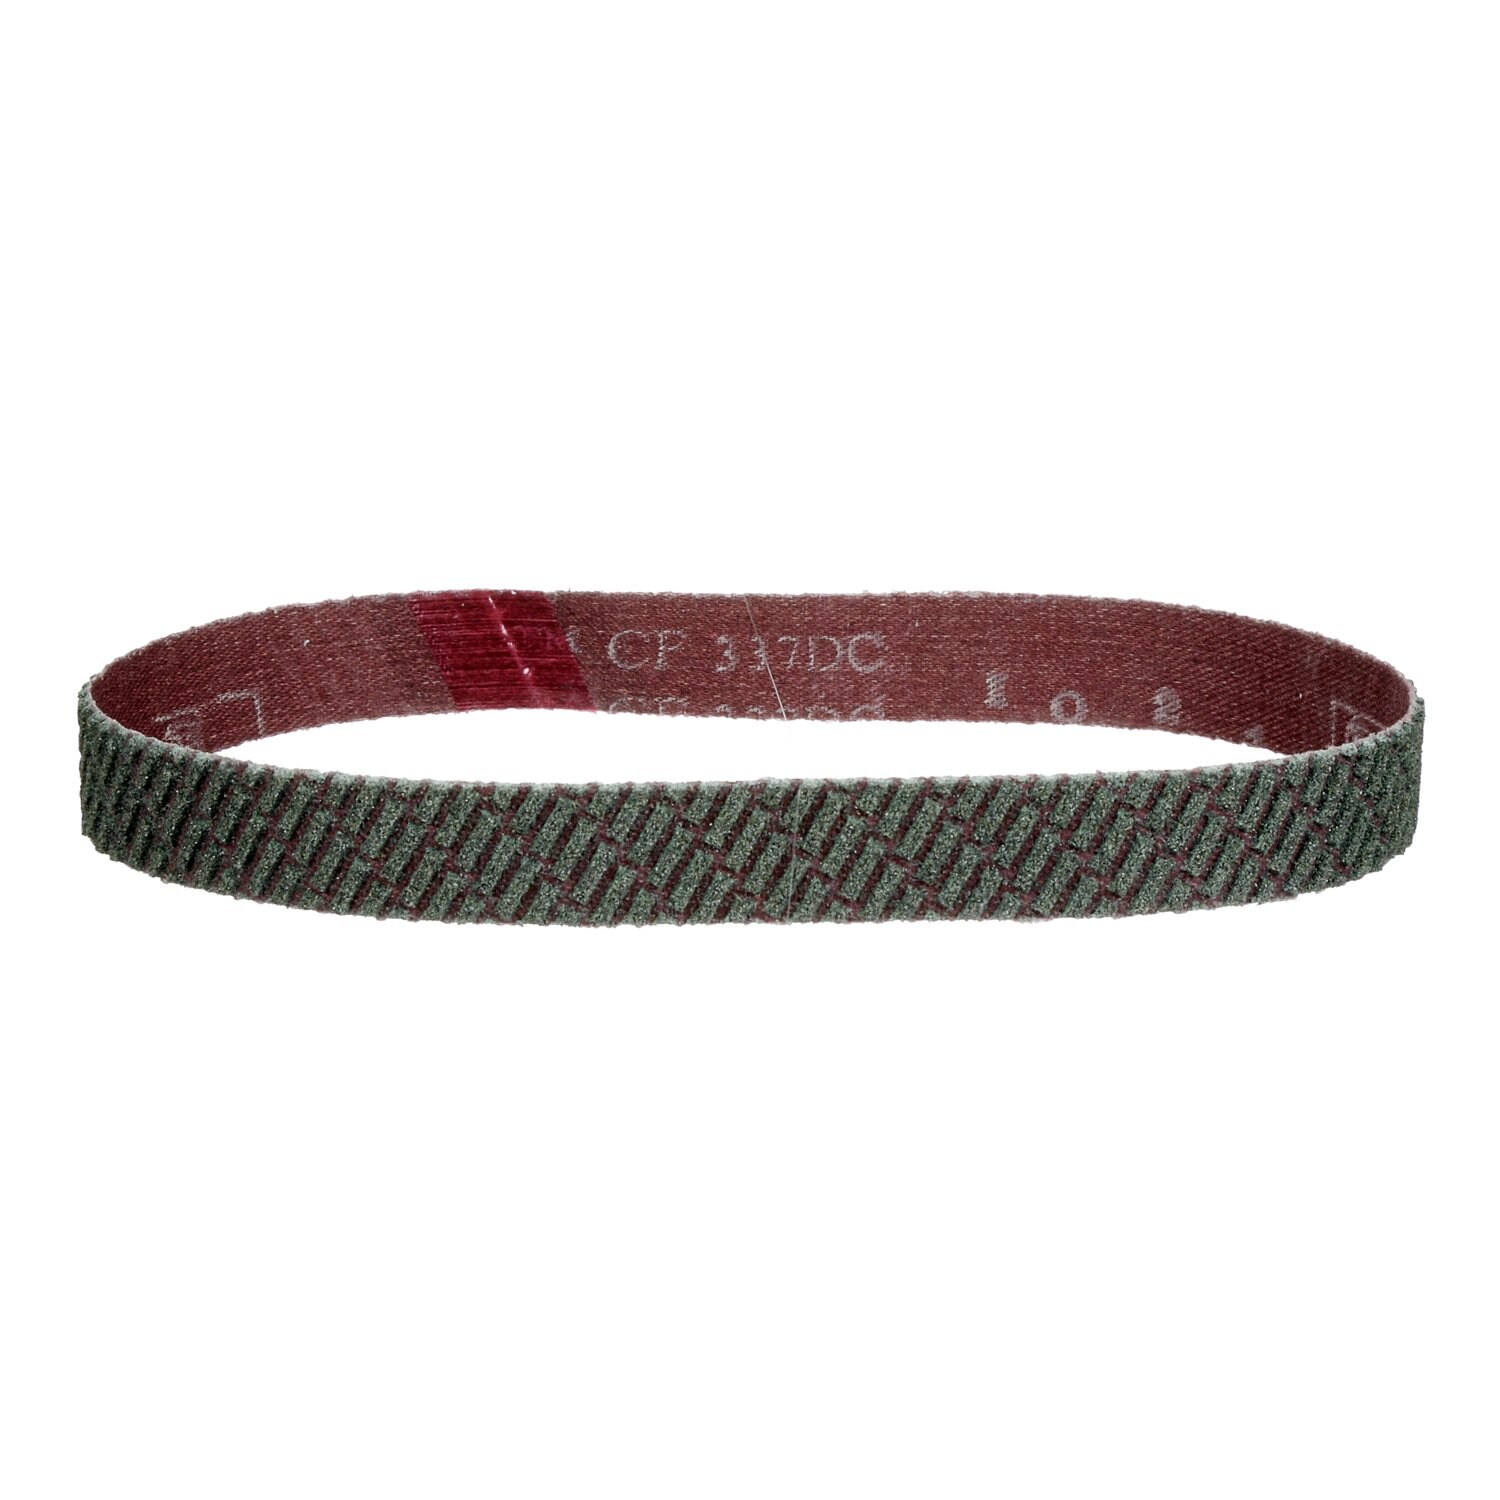 7100090090 - 3M Trizact Cloth Belt 337DC, 1/2 in X 24 in A160 X-weight, 20 ea/Case